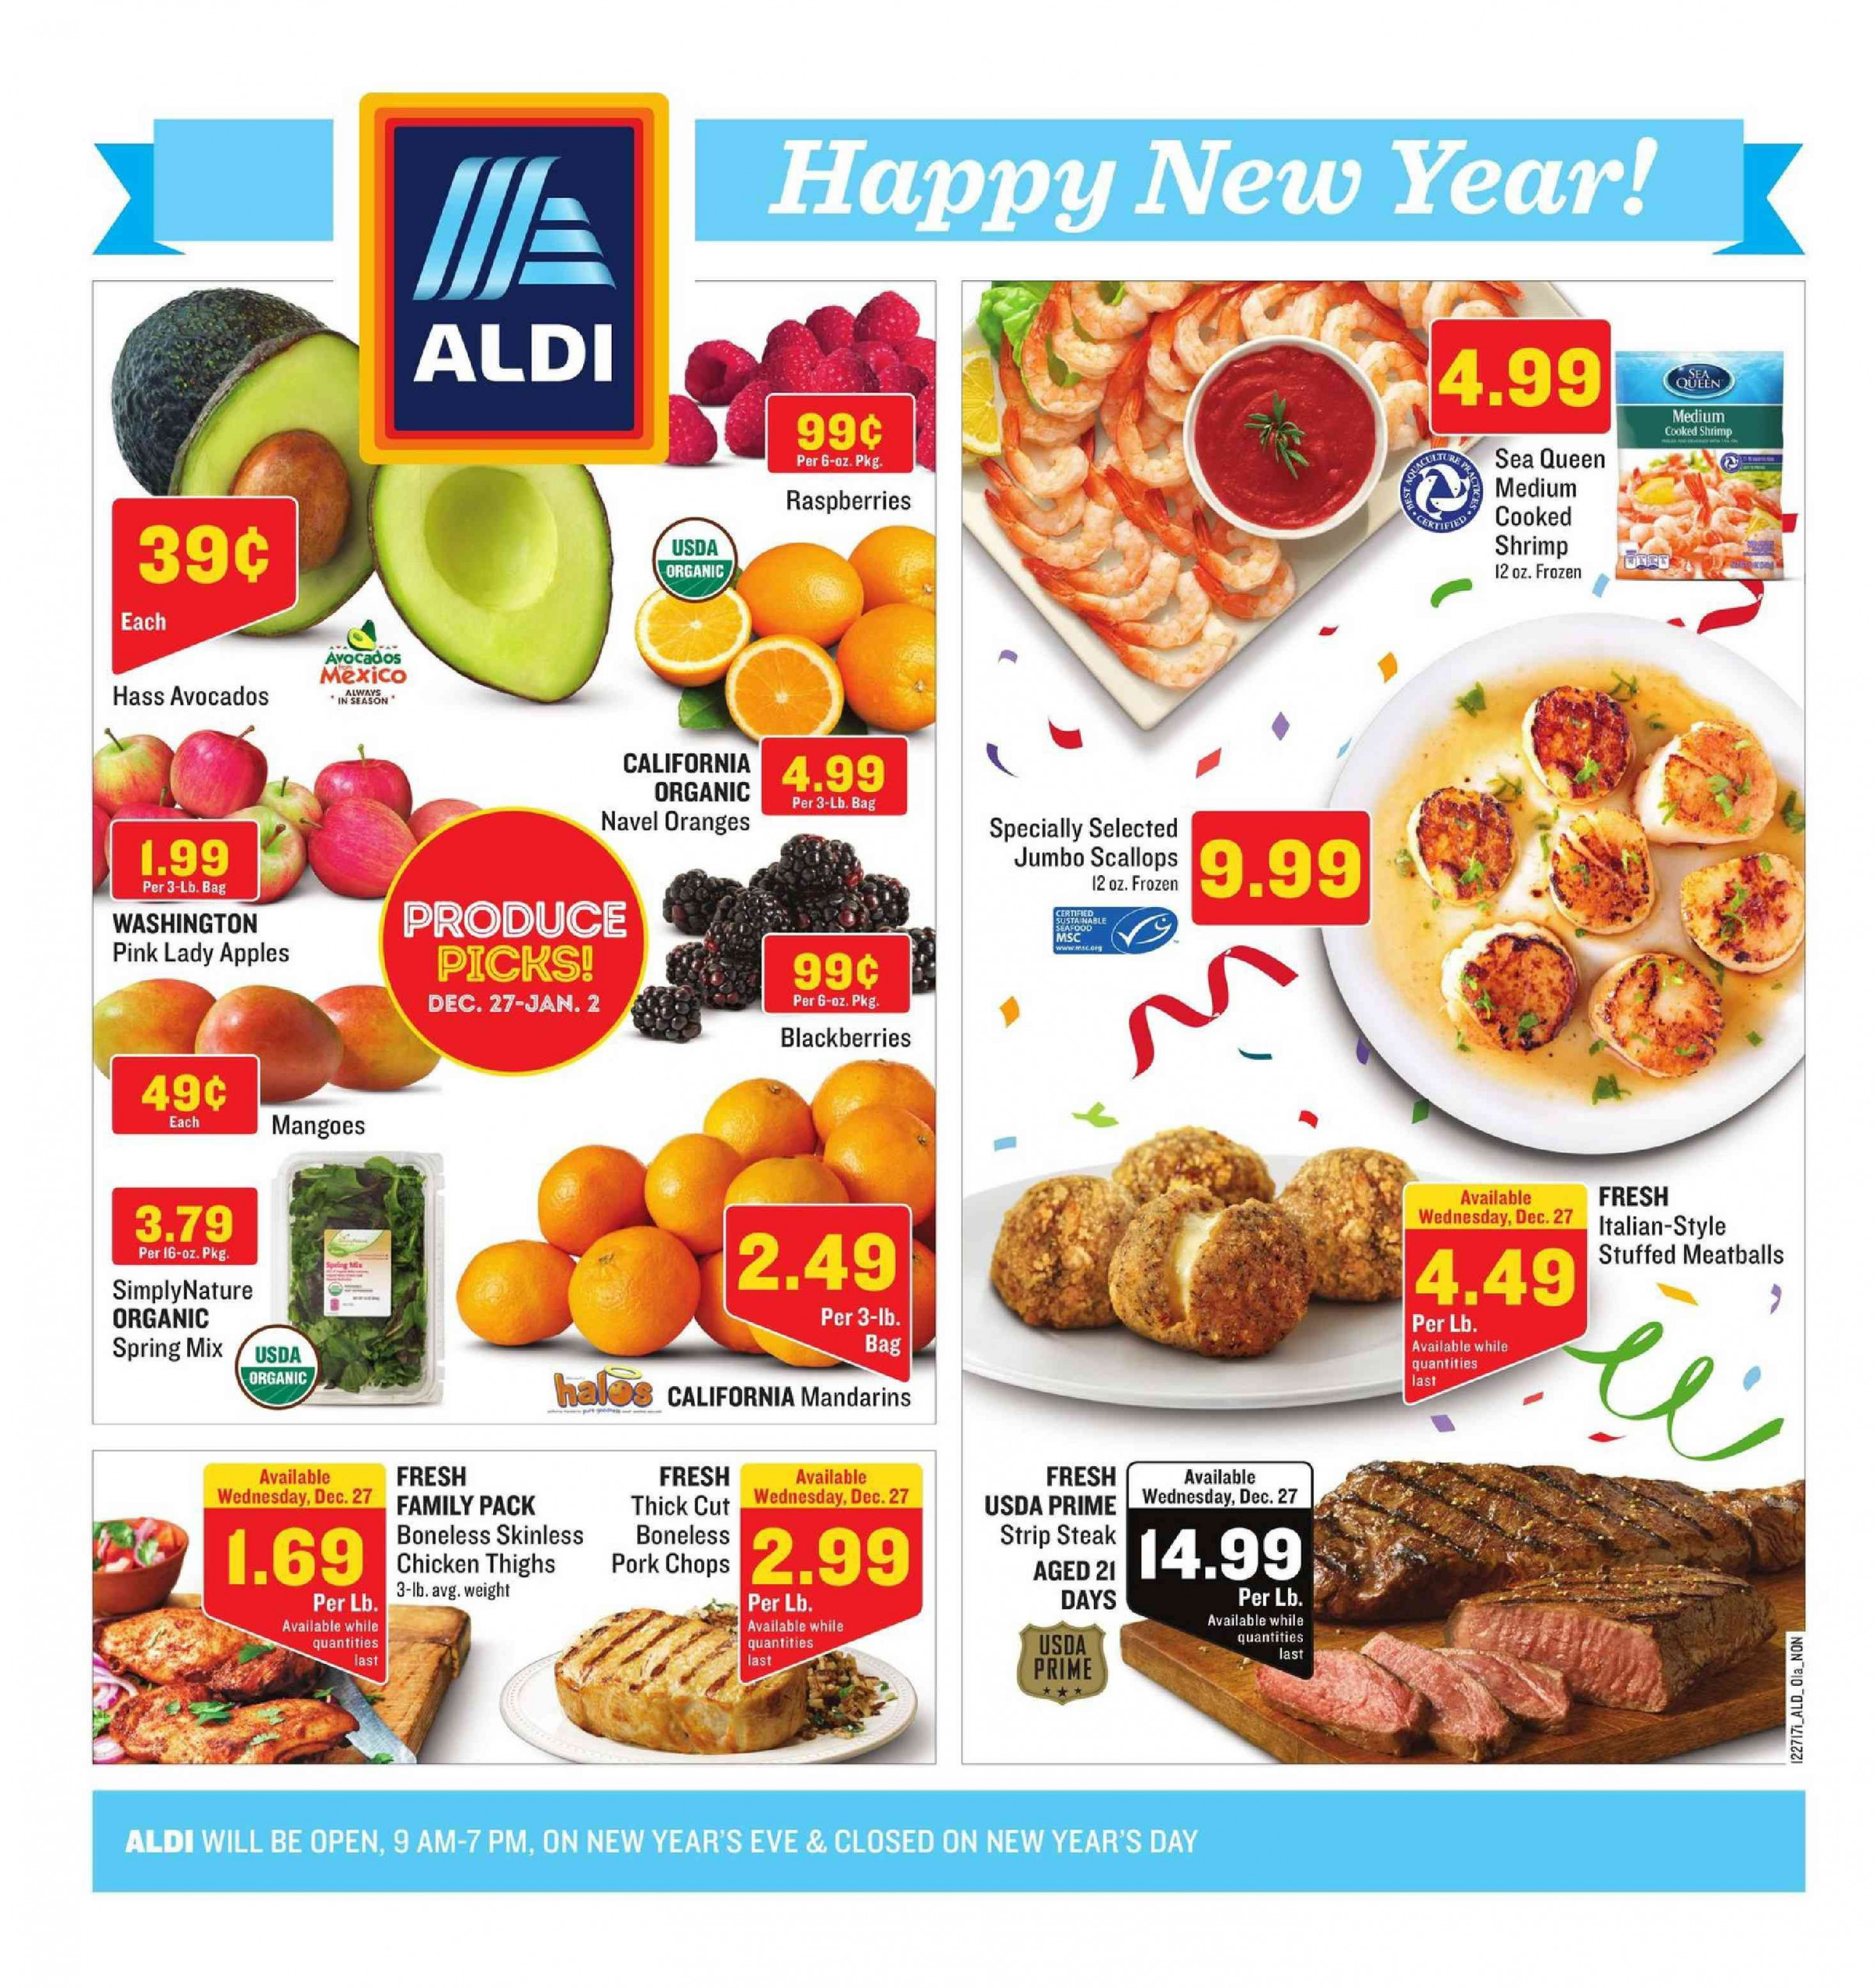 Printable Weekly Grocery Ads The Power Of Advertisement